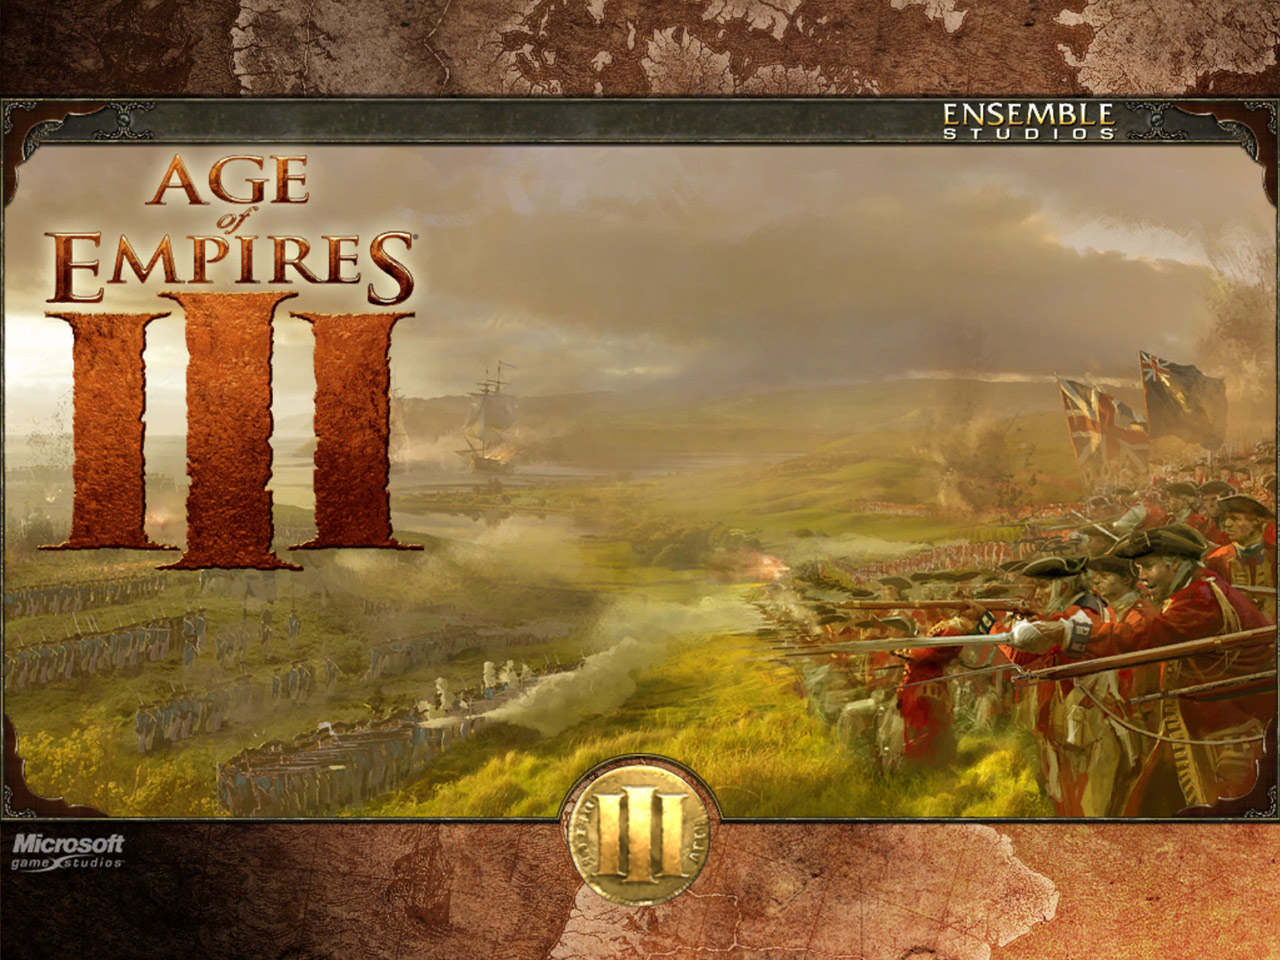 Steam age of empires 3 initialization failed win 10